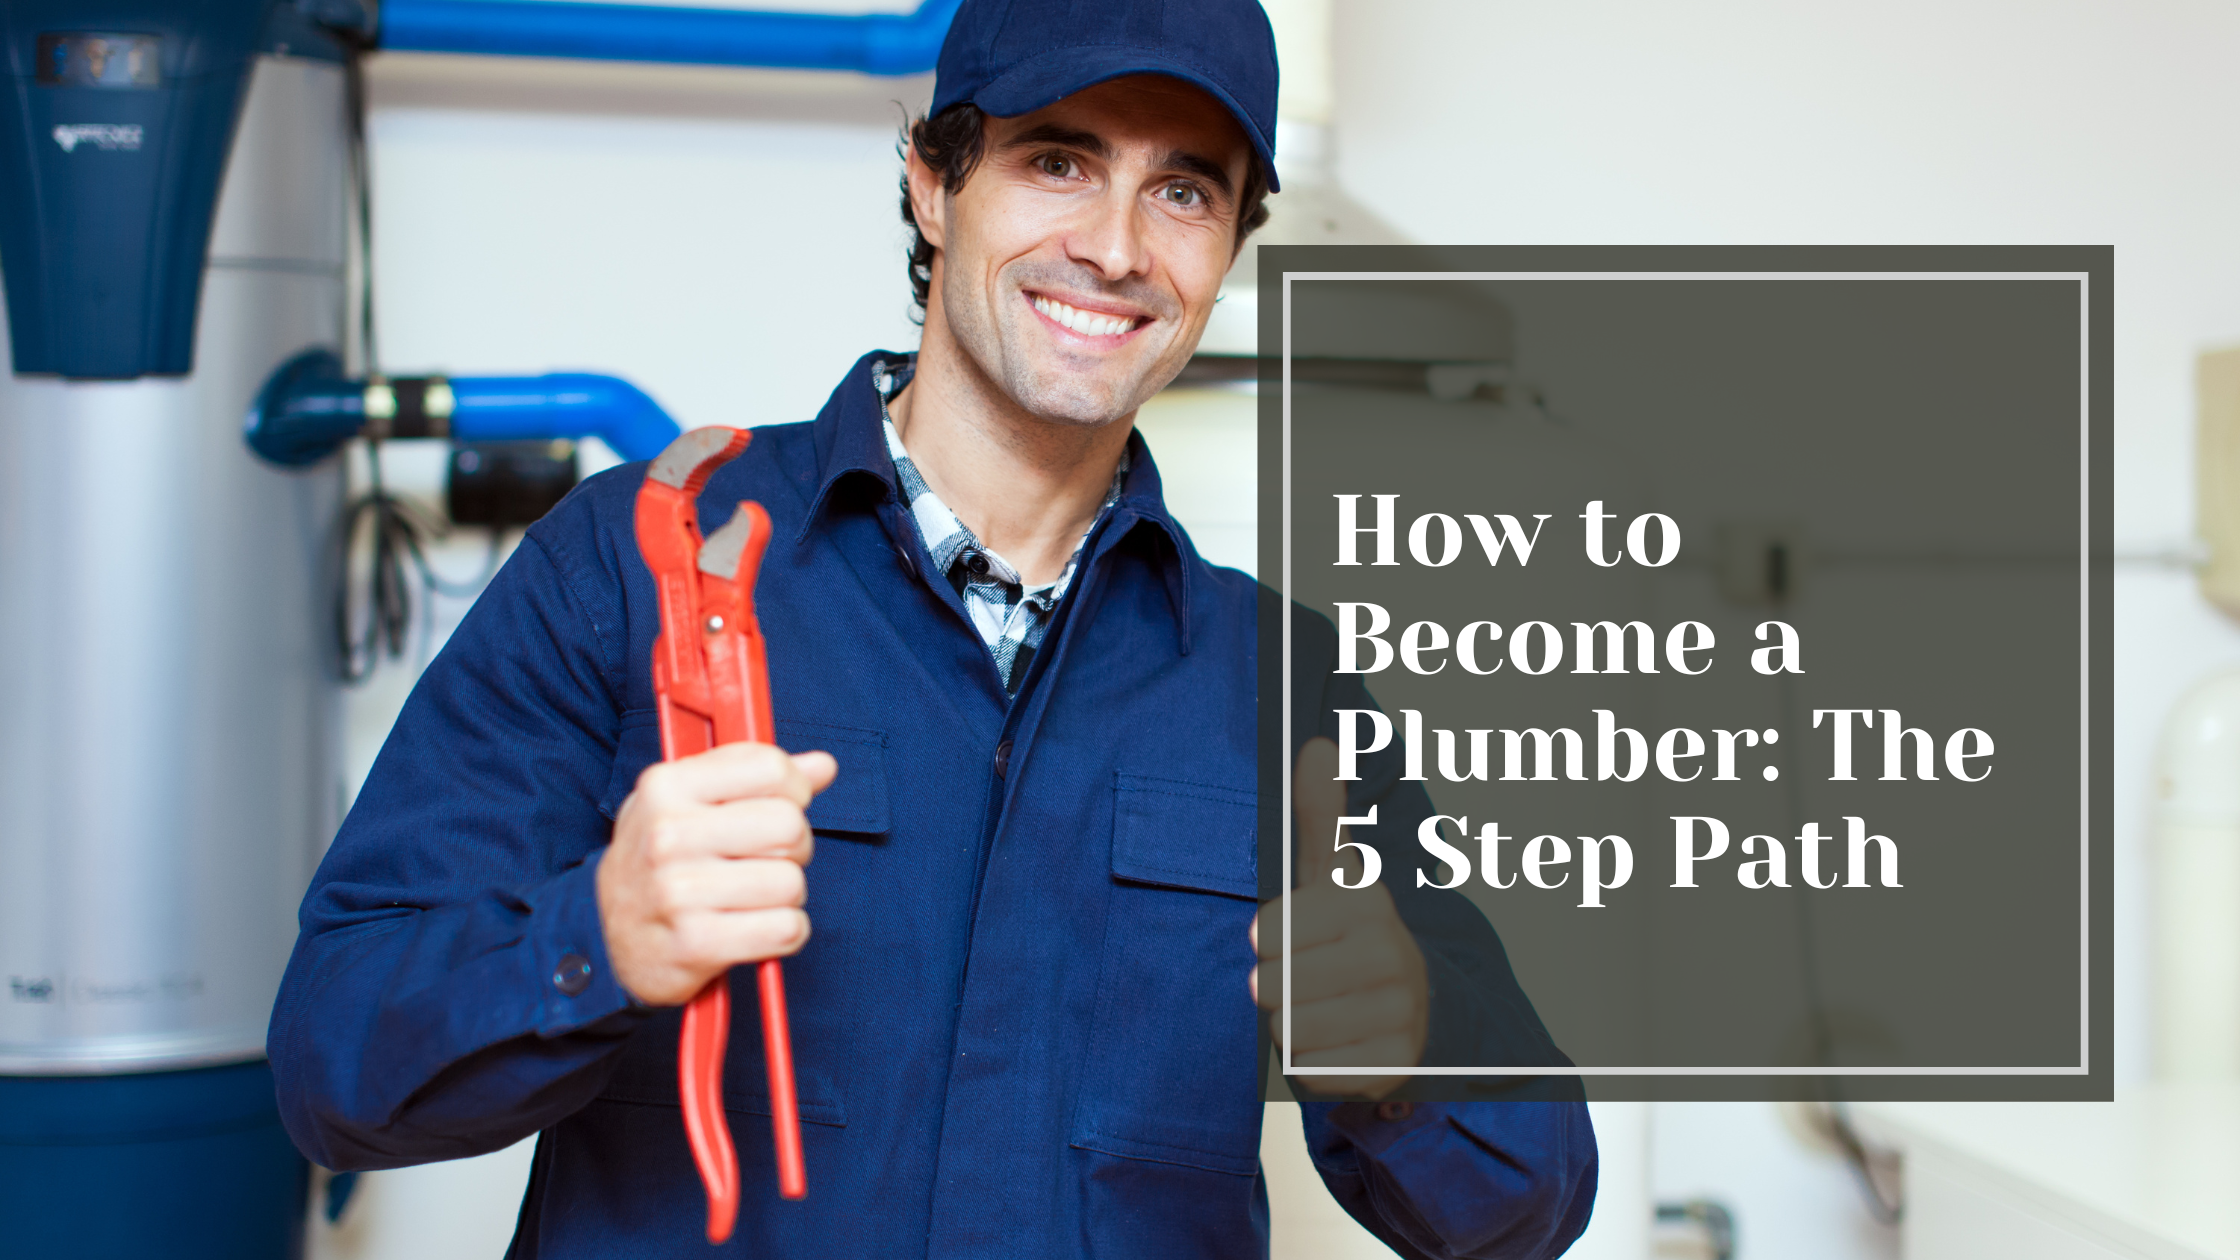 How to Become a Plumber: Plumber Career Path